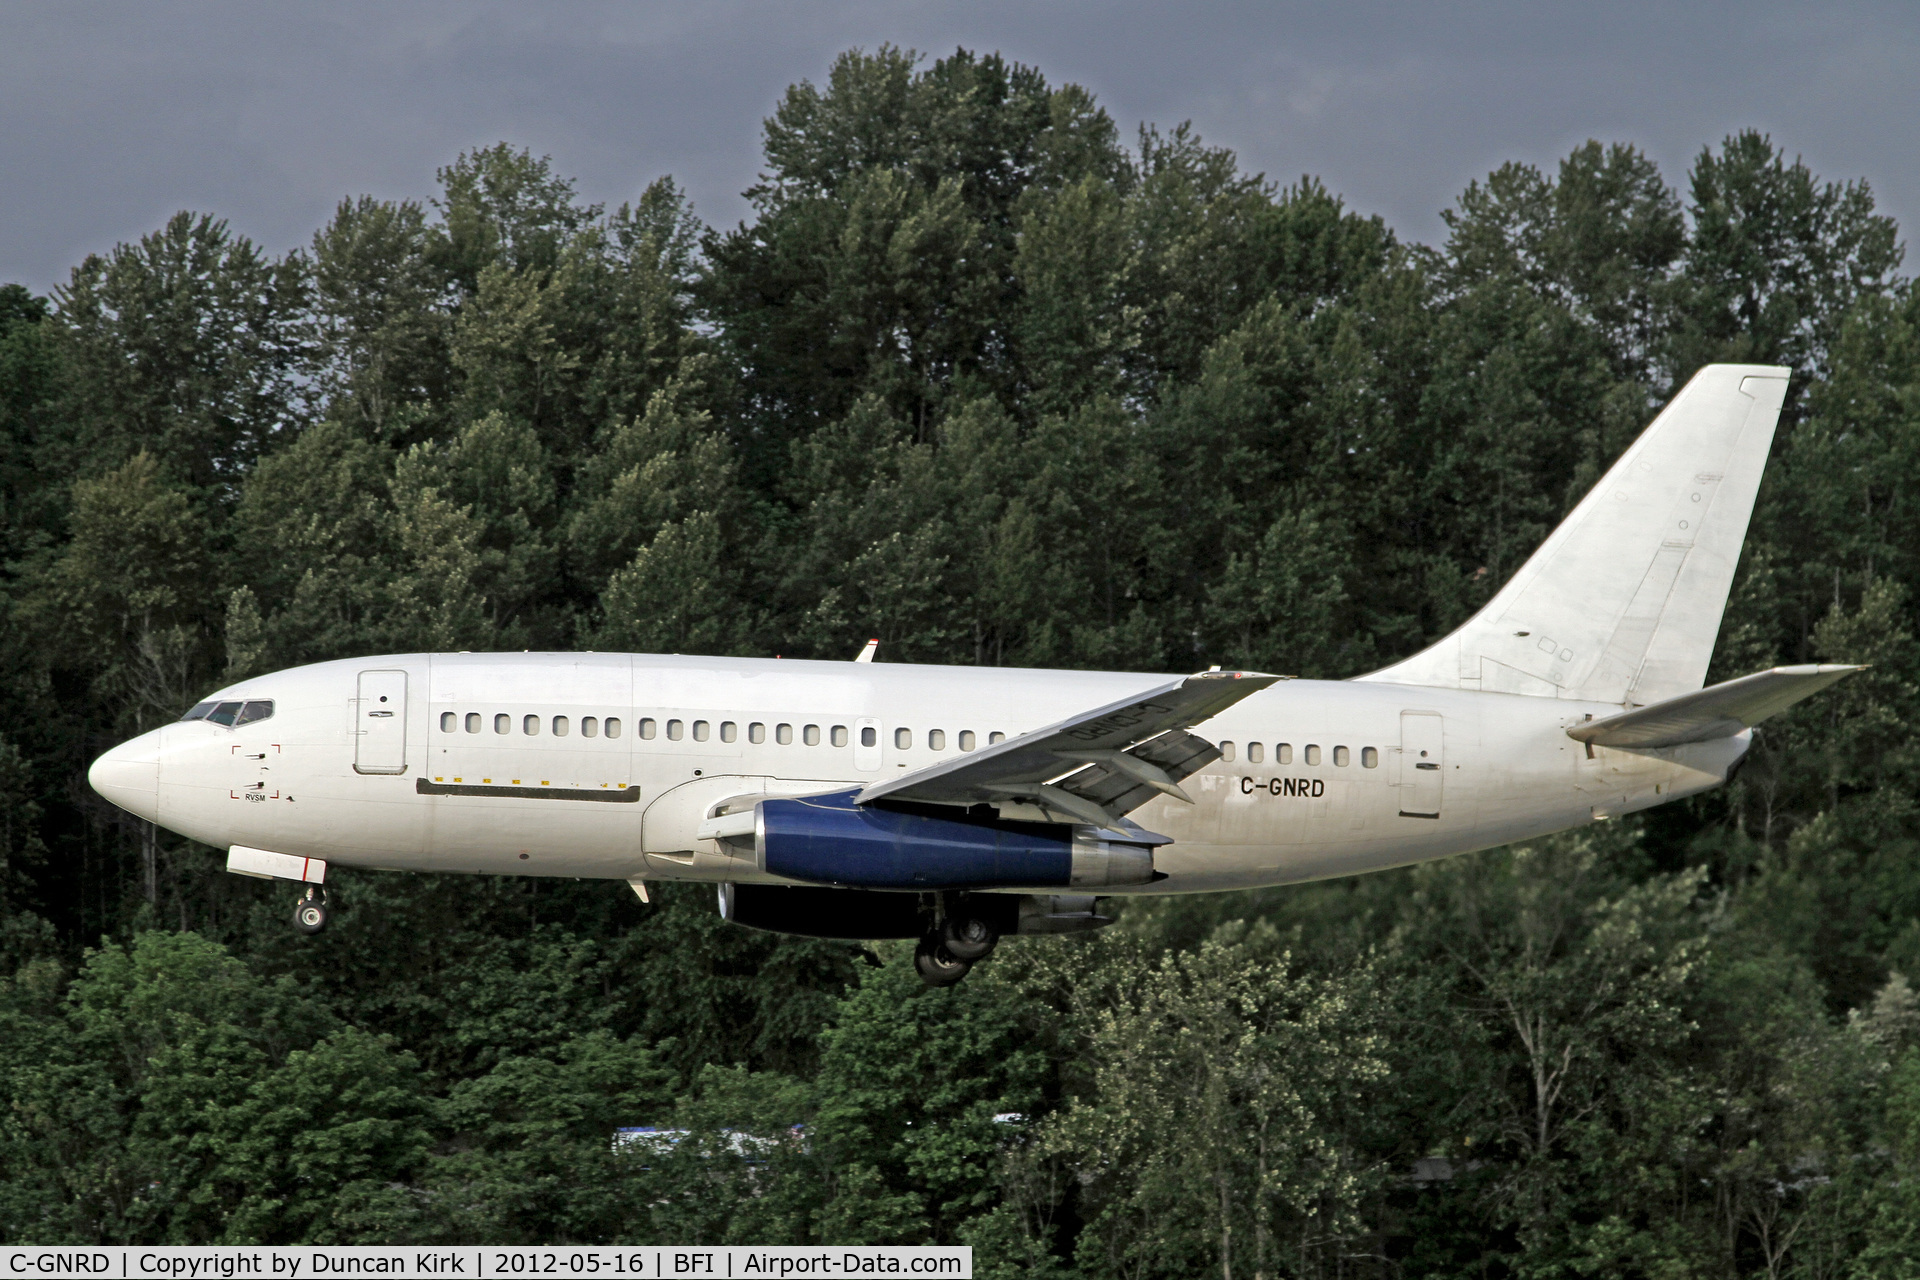 C-GNRD, 1979 Boeing 737-229C C/N 21738, Daily Norlinar arrival at BFI from Calgary